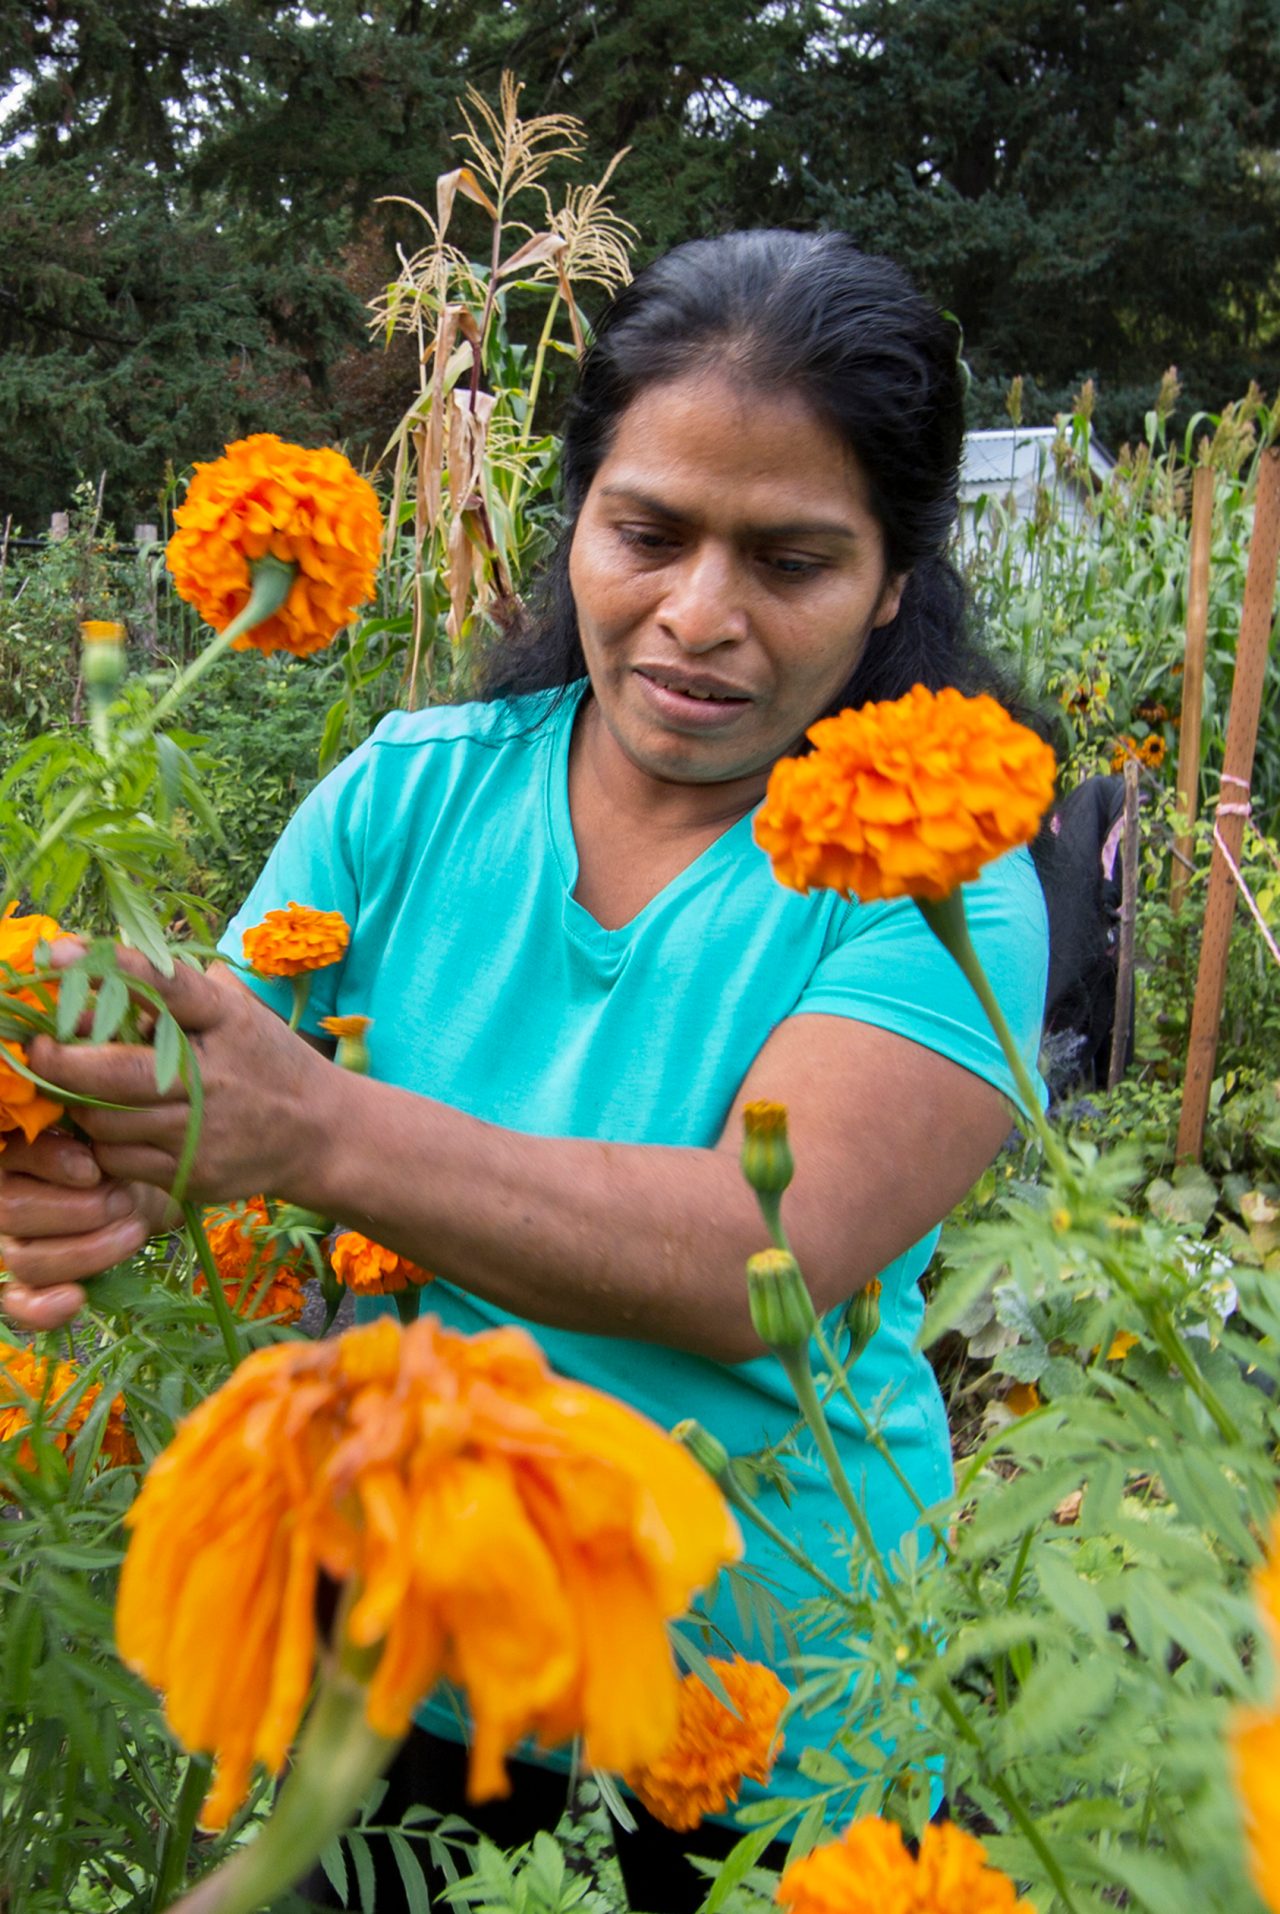 A volunteer working in a public community garden reaches with her hands to harvest bright and colorful blooming flowers